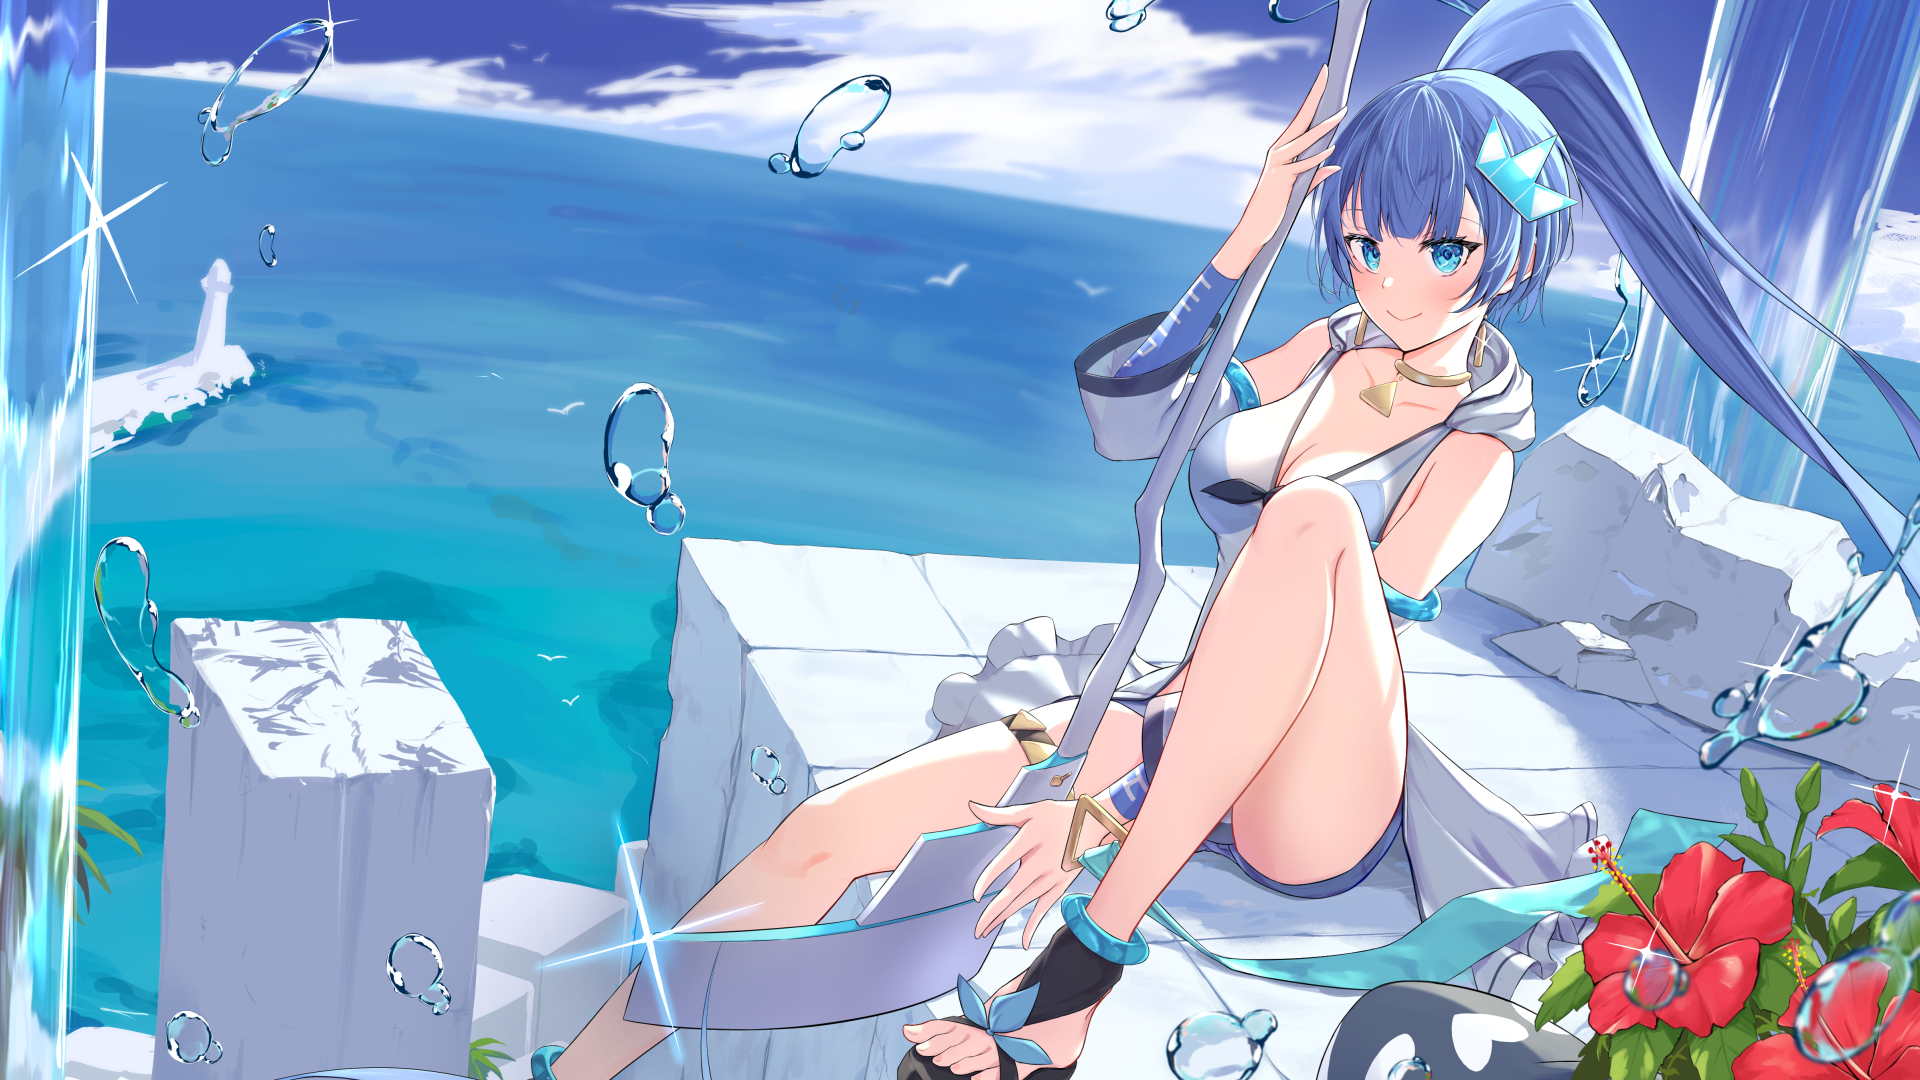 Anime 1920x1080 anime anime girls Cocoablue23 artwork vacation ponytail blue hair blue eyes smiling bikini sitting hibiscus water drops clouds